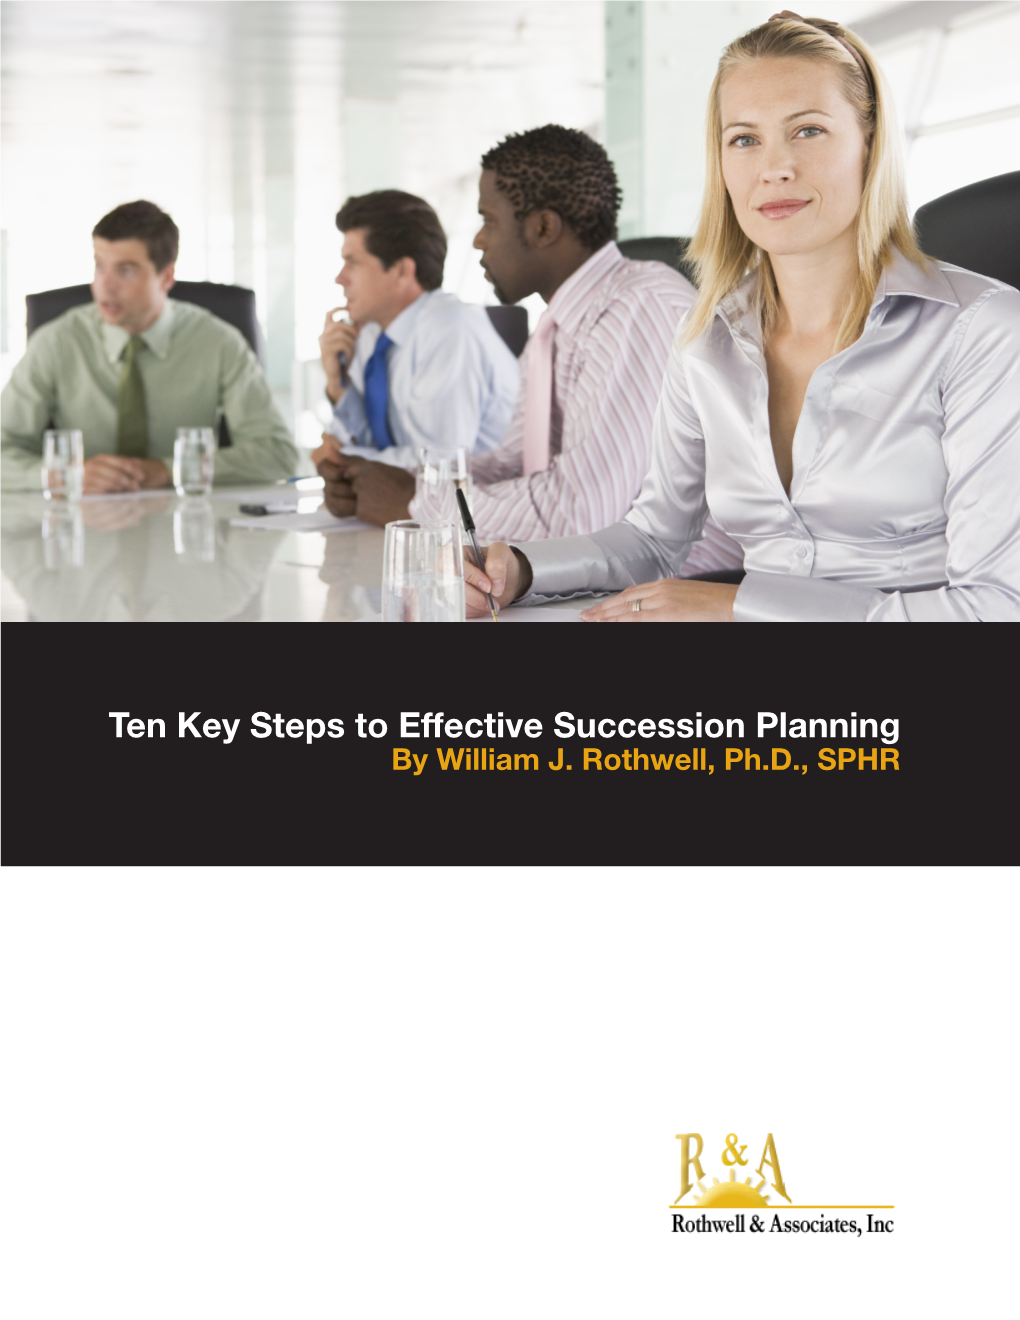 Ten Key Steps to Effective Succession Planning by William J